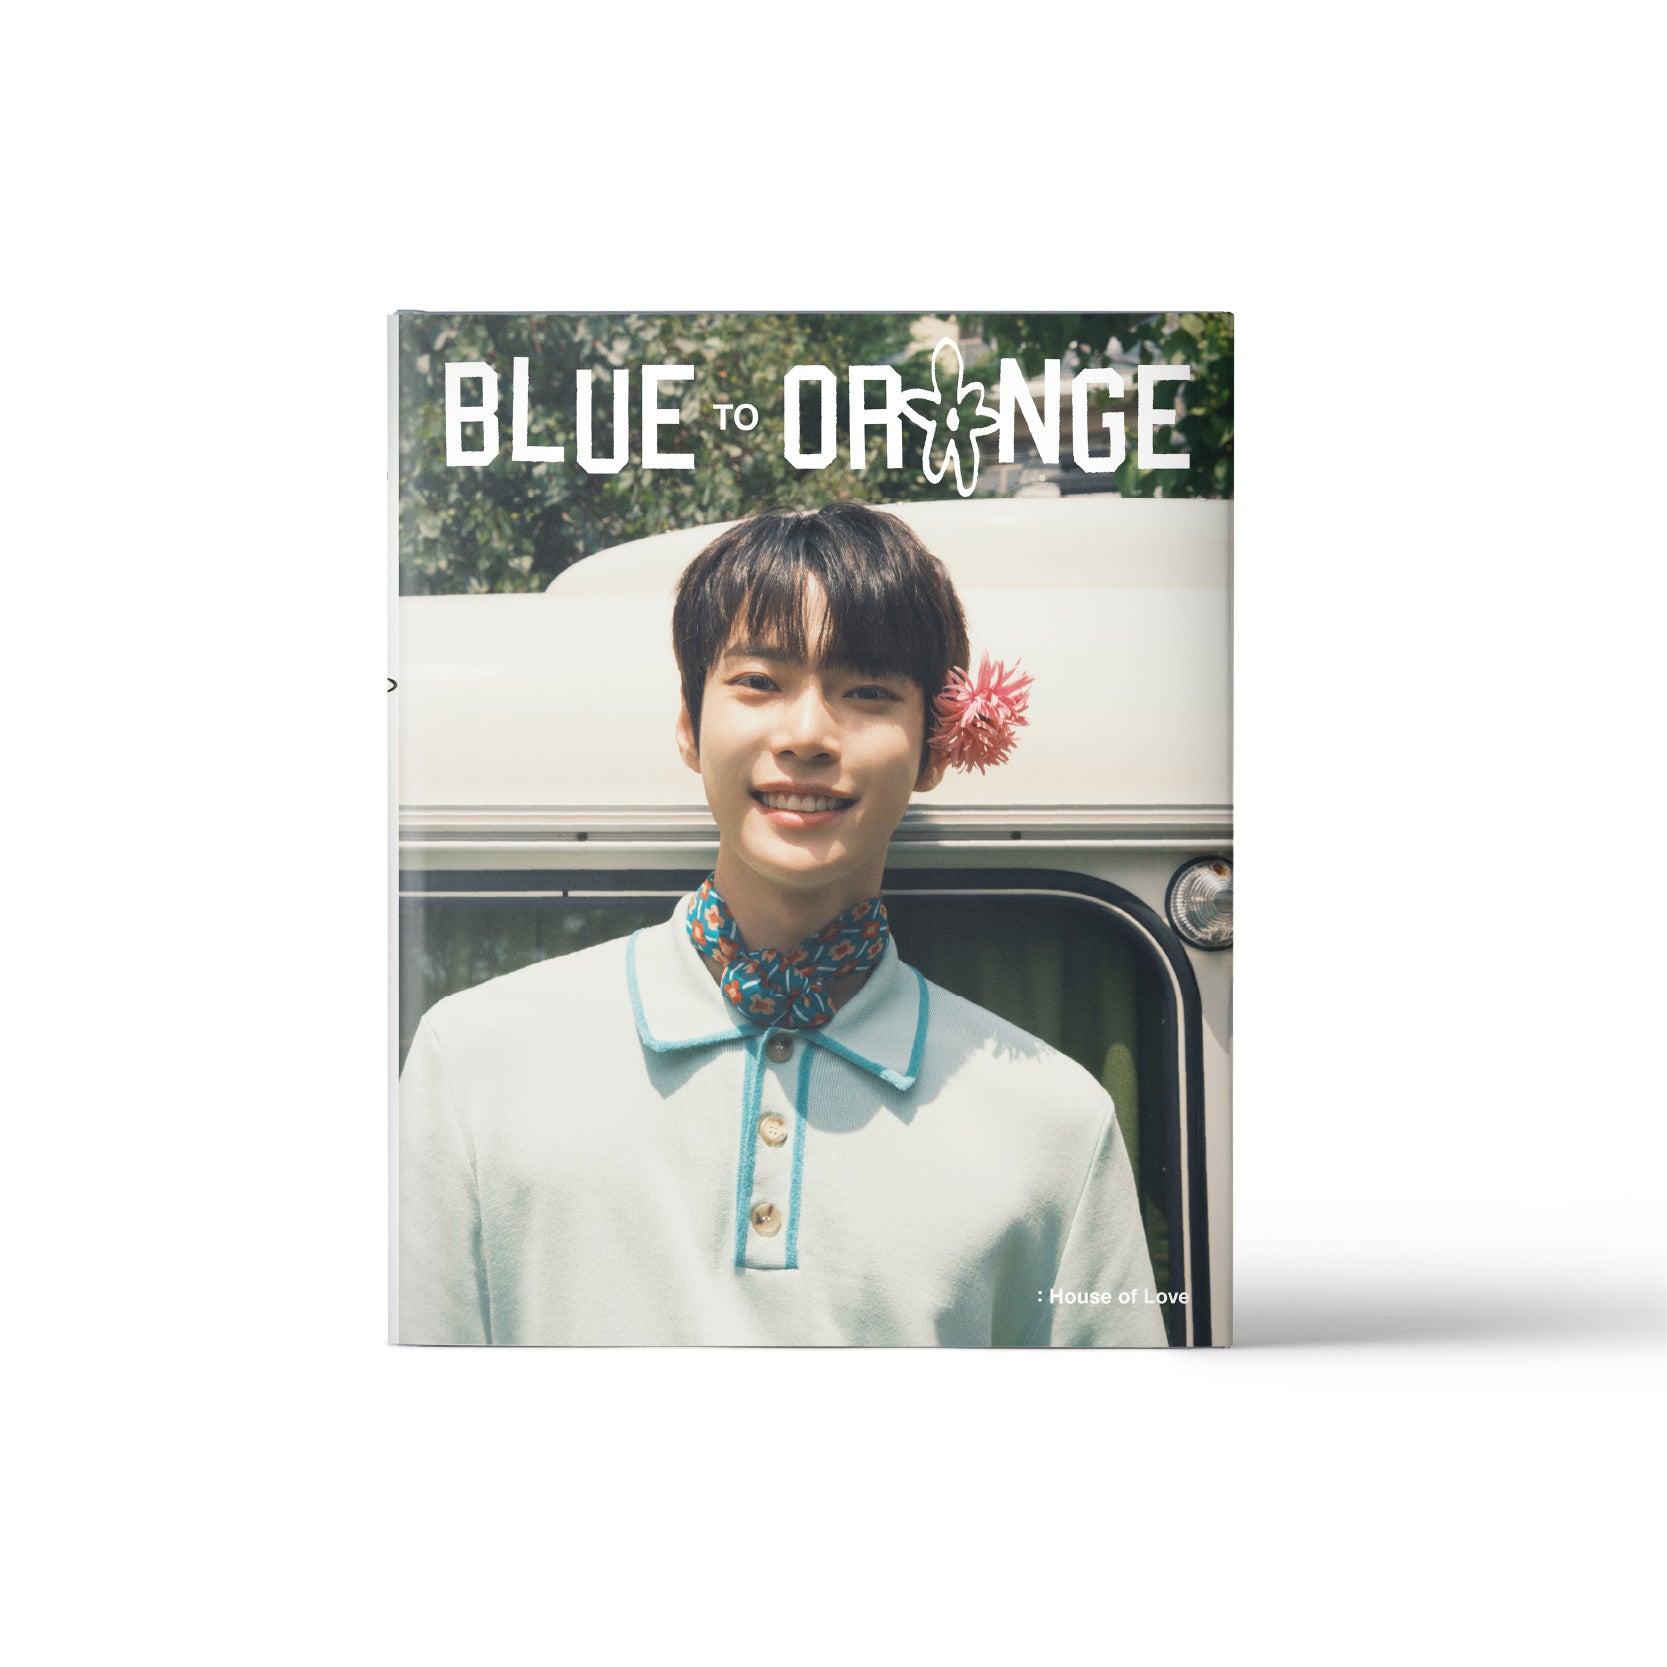 NCT 127 DOYOUNG - BLUE TO ORANGE : House of Love (PHOTOBOOK)